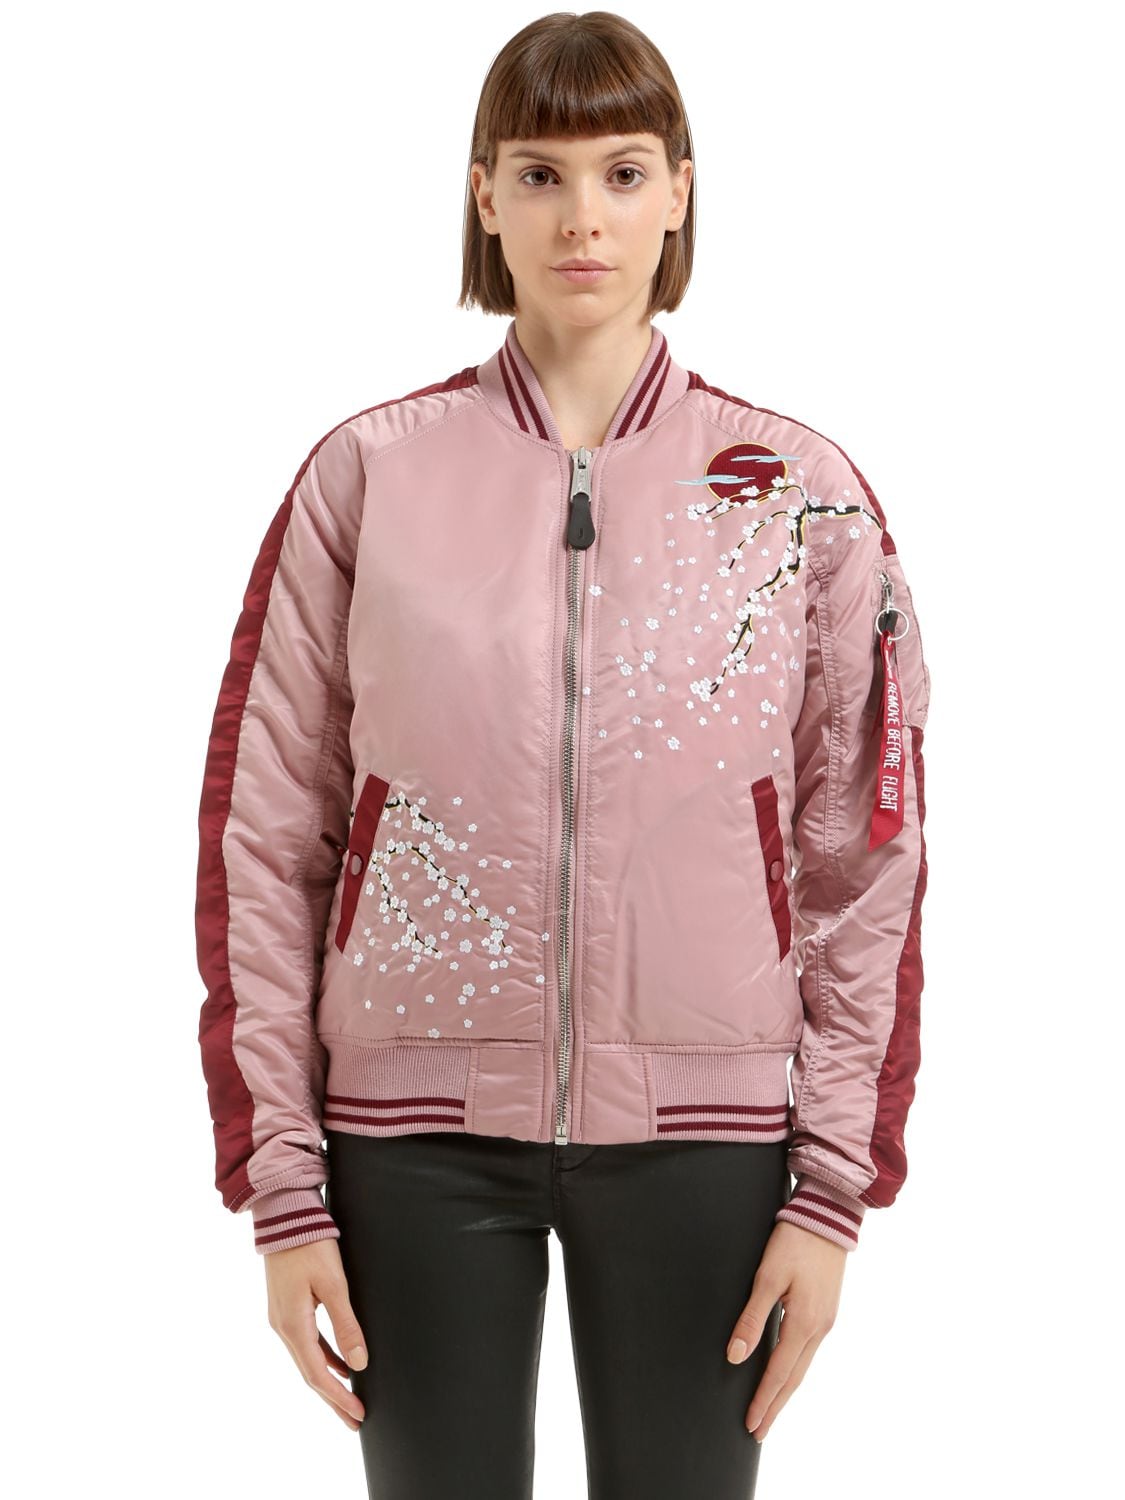 ALPHA INDUSTRIES FLORAL EMBROIDERED NYLON BOMBER JACKET,66IW3X014-MZK30